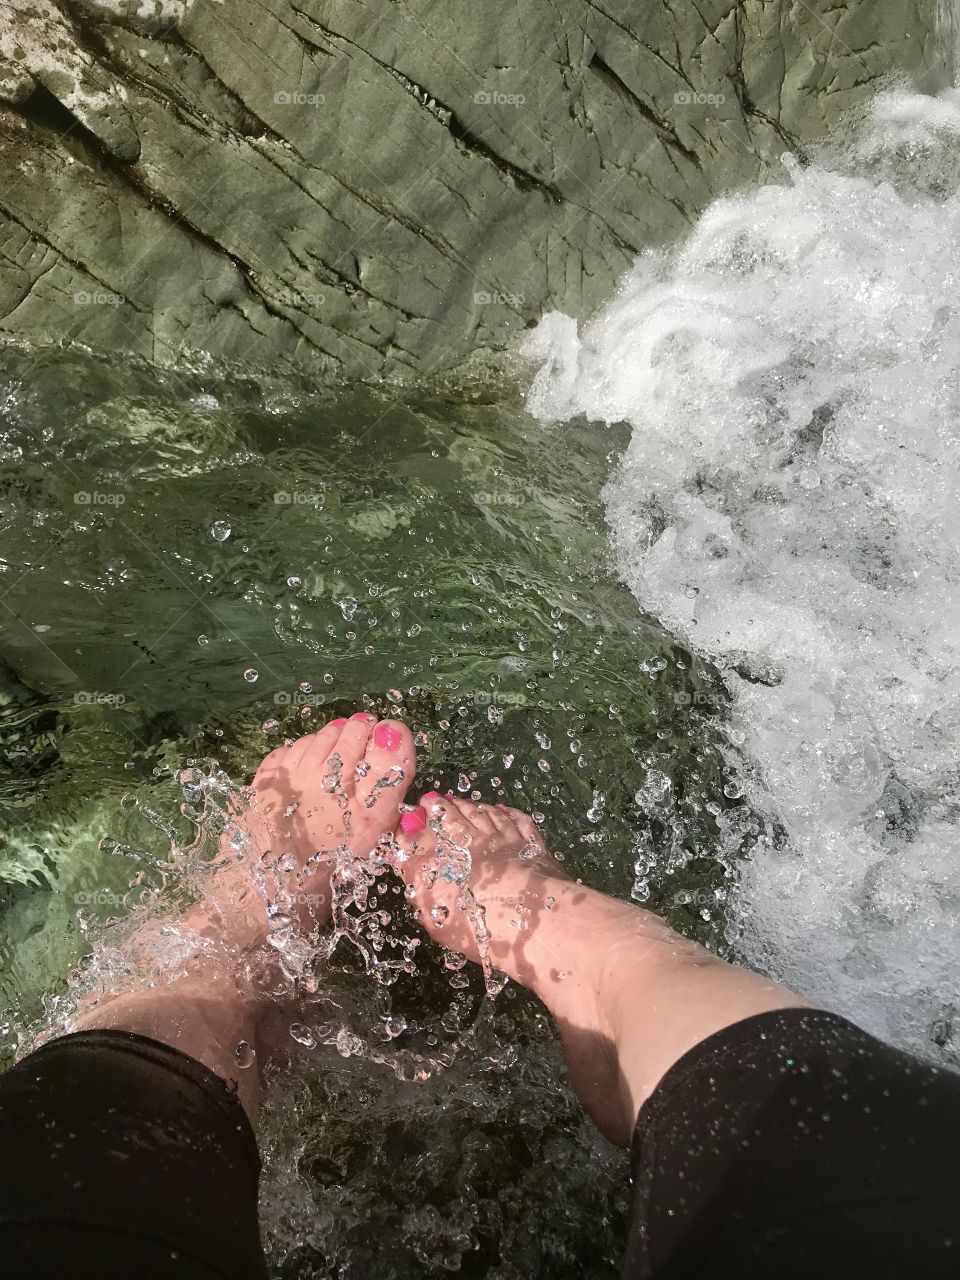 Couldn’t resist dipping my toes in the cool sparkly water.  Pink pedicure stands out.